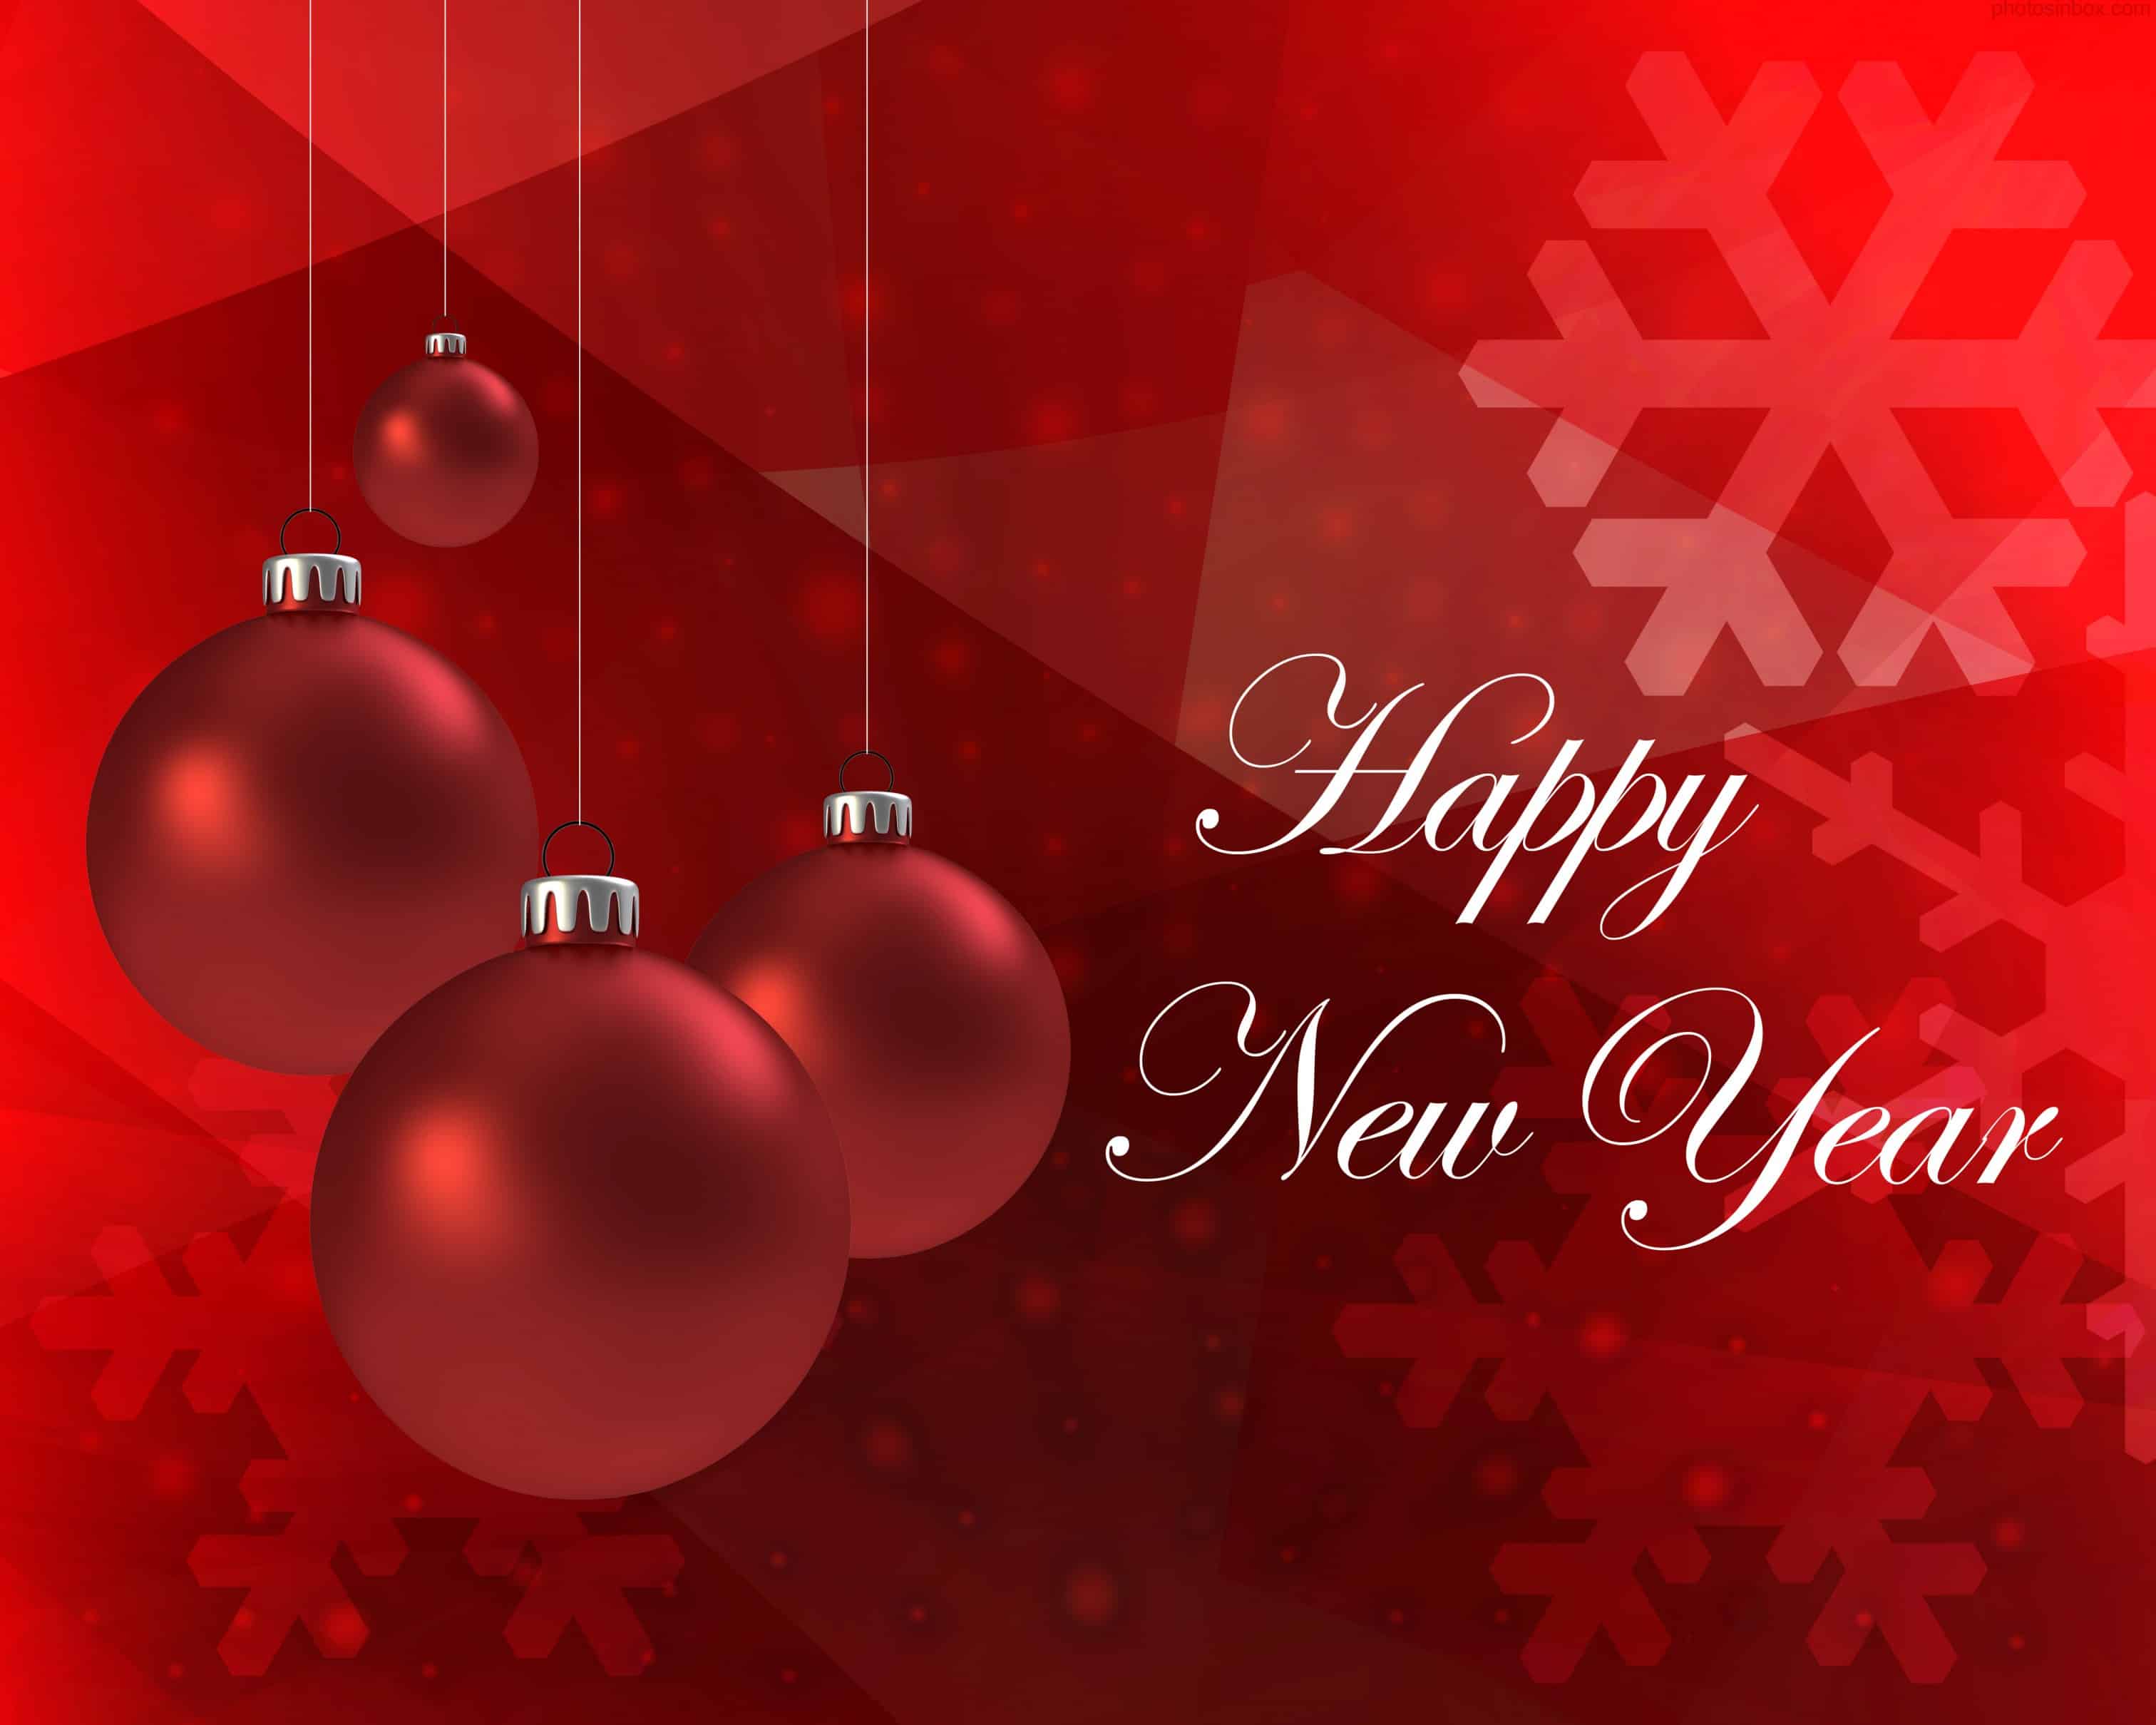 Happy New Year Greeting Cards - High Definition Wallpaper